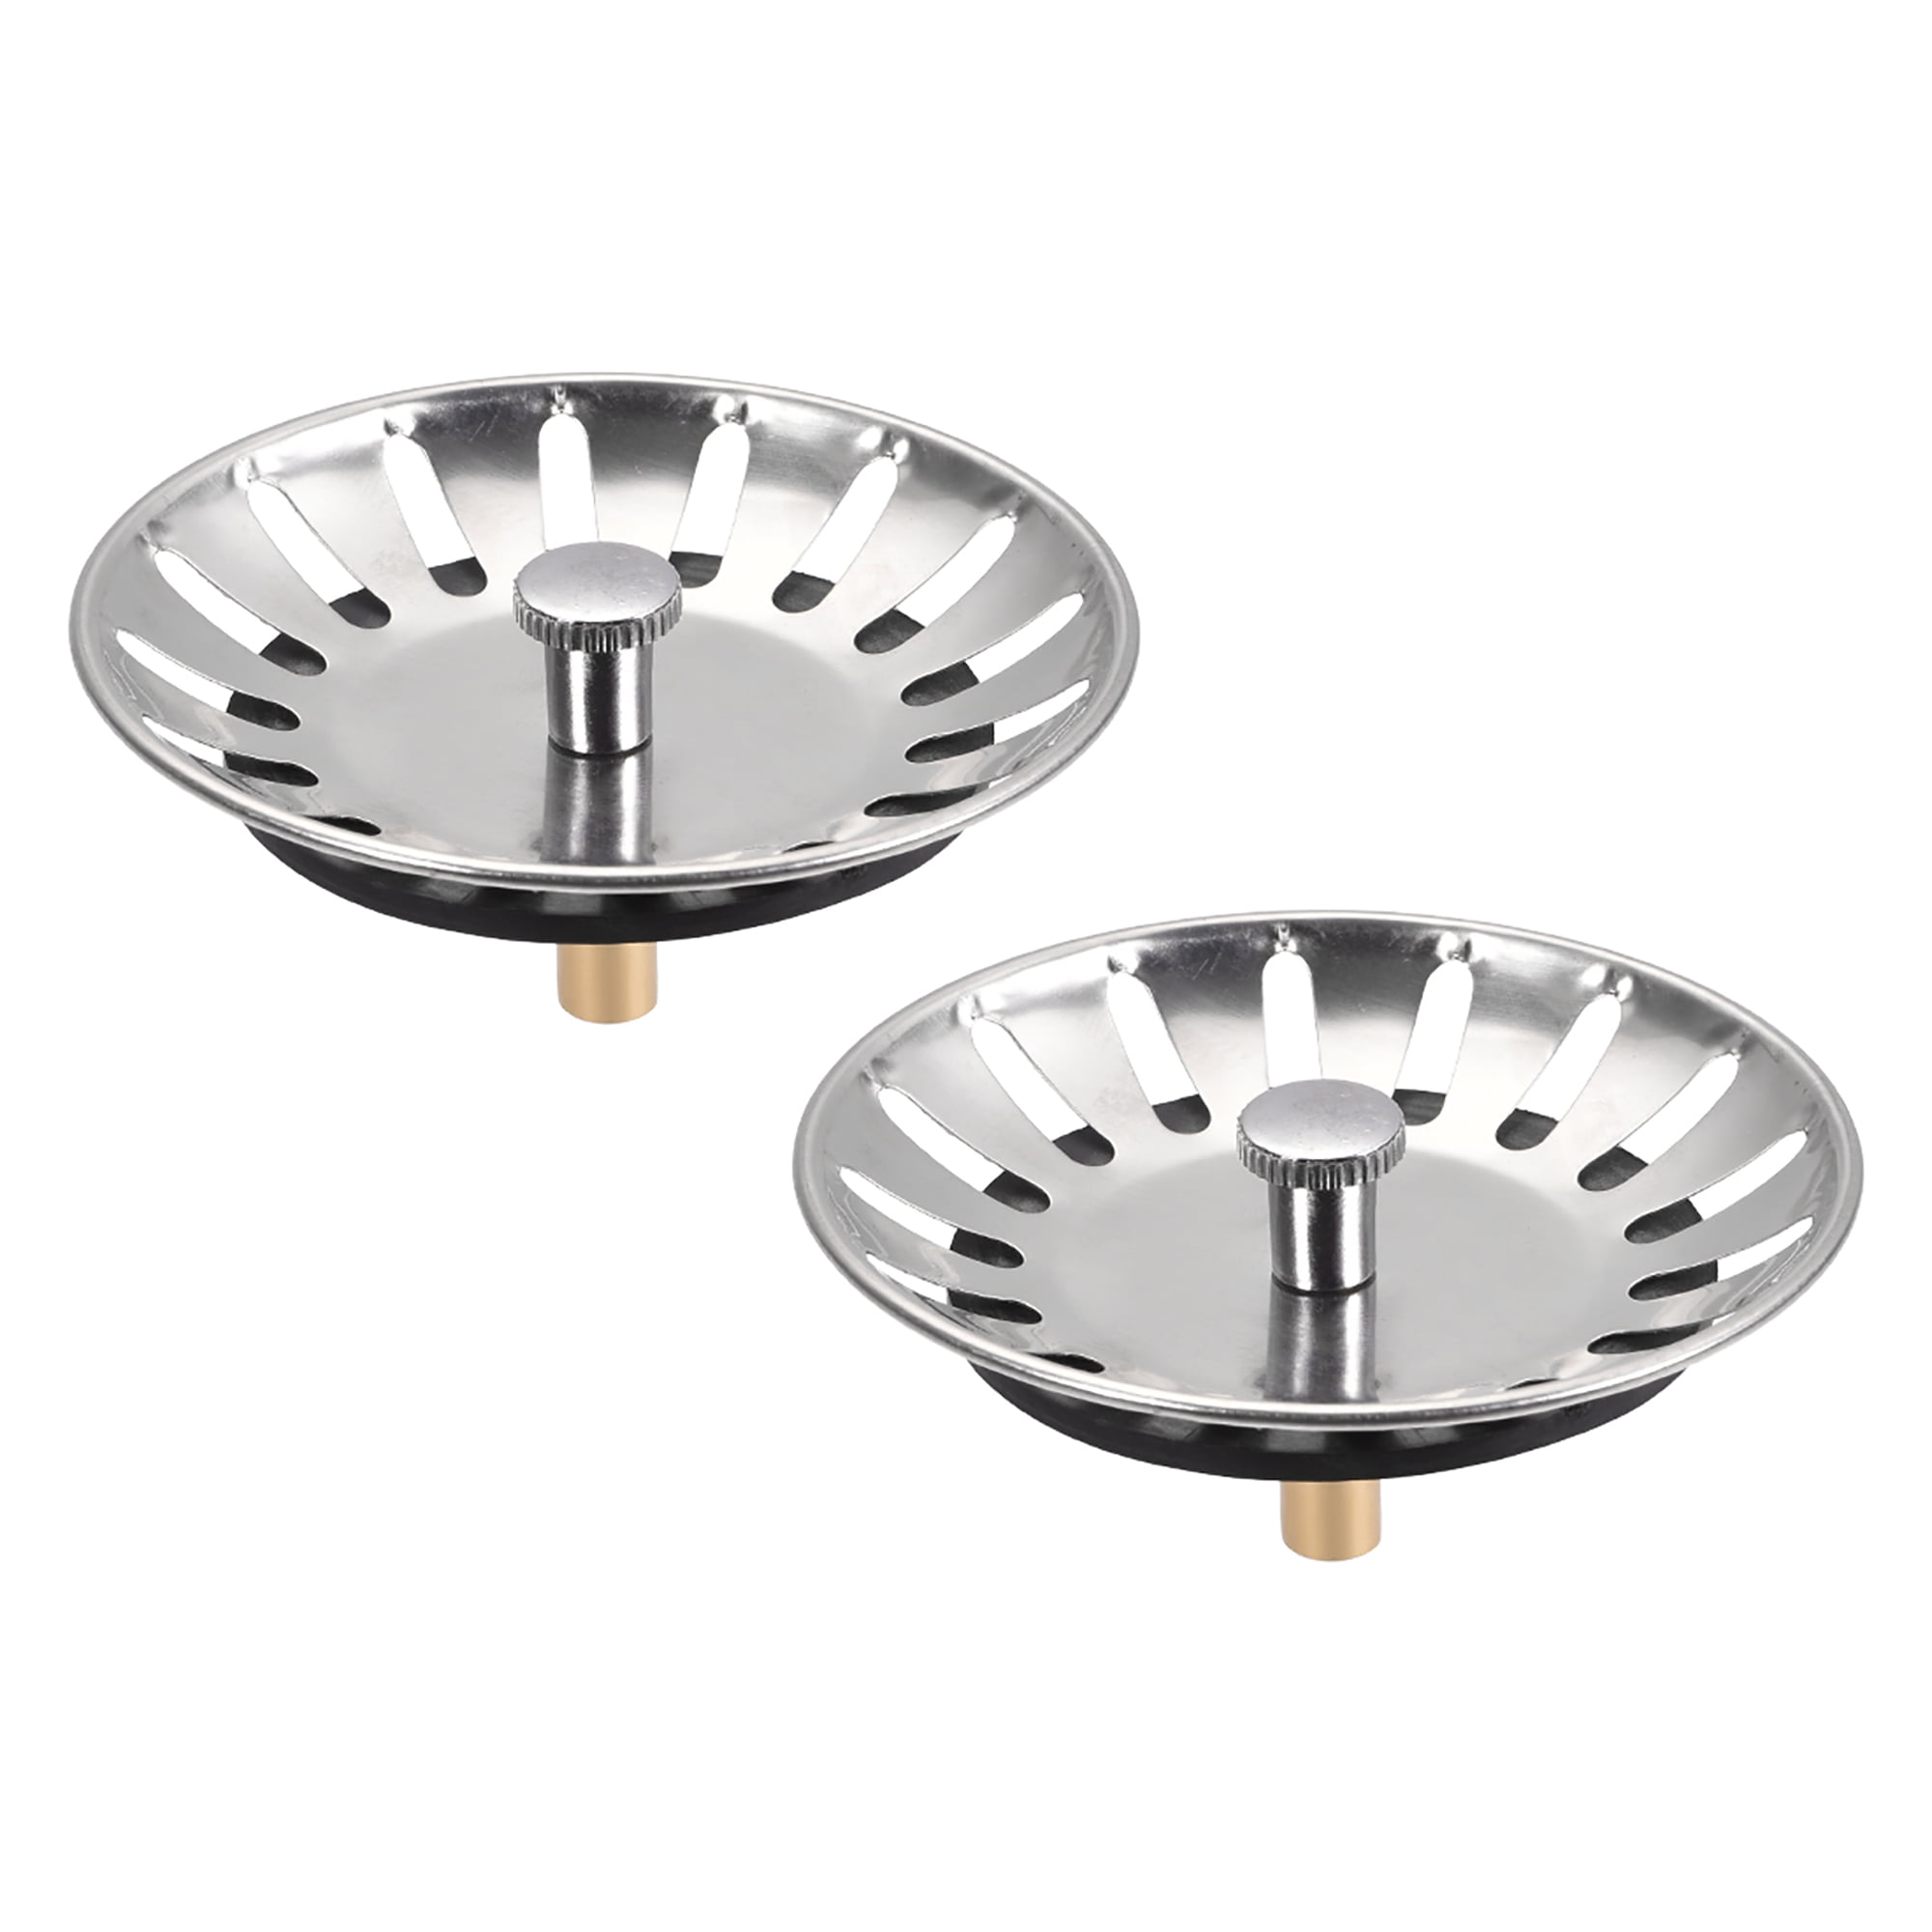 EverFlow Kitchen Sink Basket Strainer Stainless Steel and Drain Stopper 